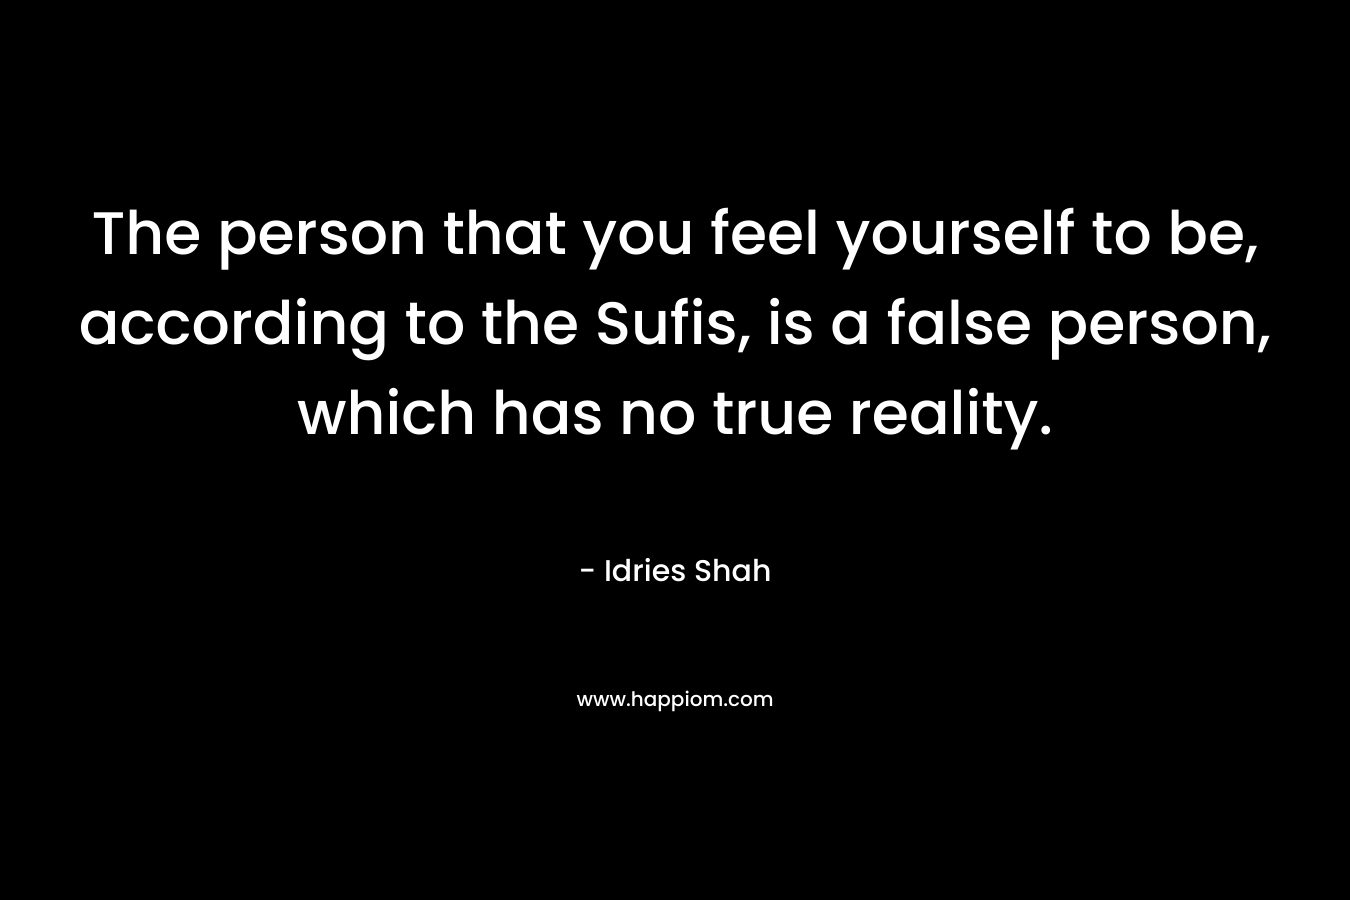 The person that you feel yourself to be, according to the Sufis, is a false person, which has no true reality.